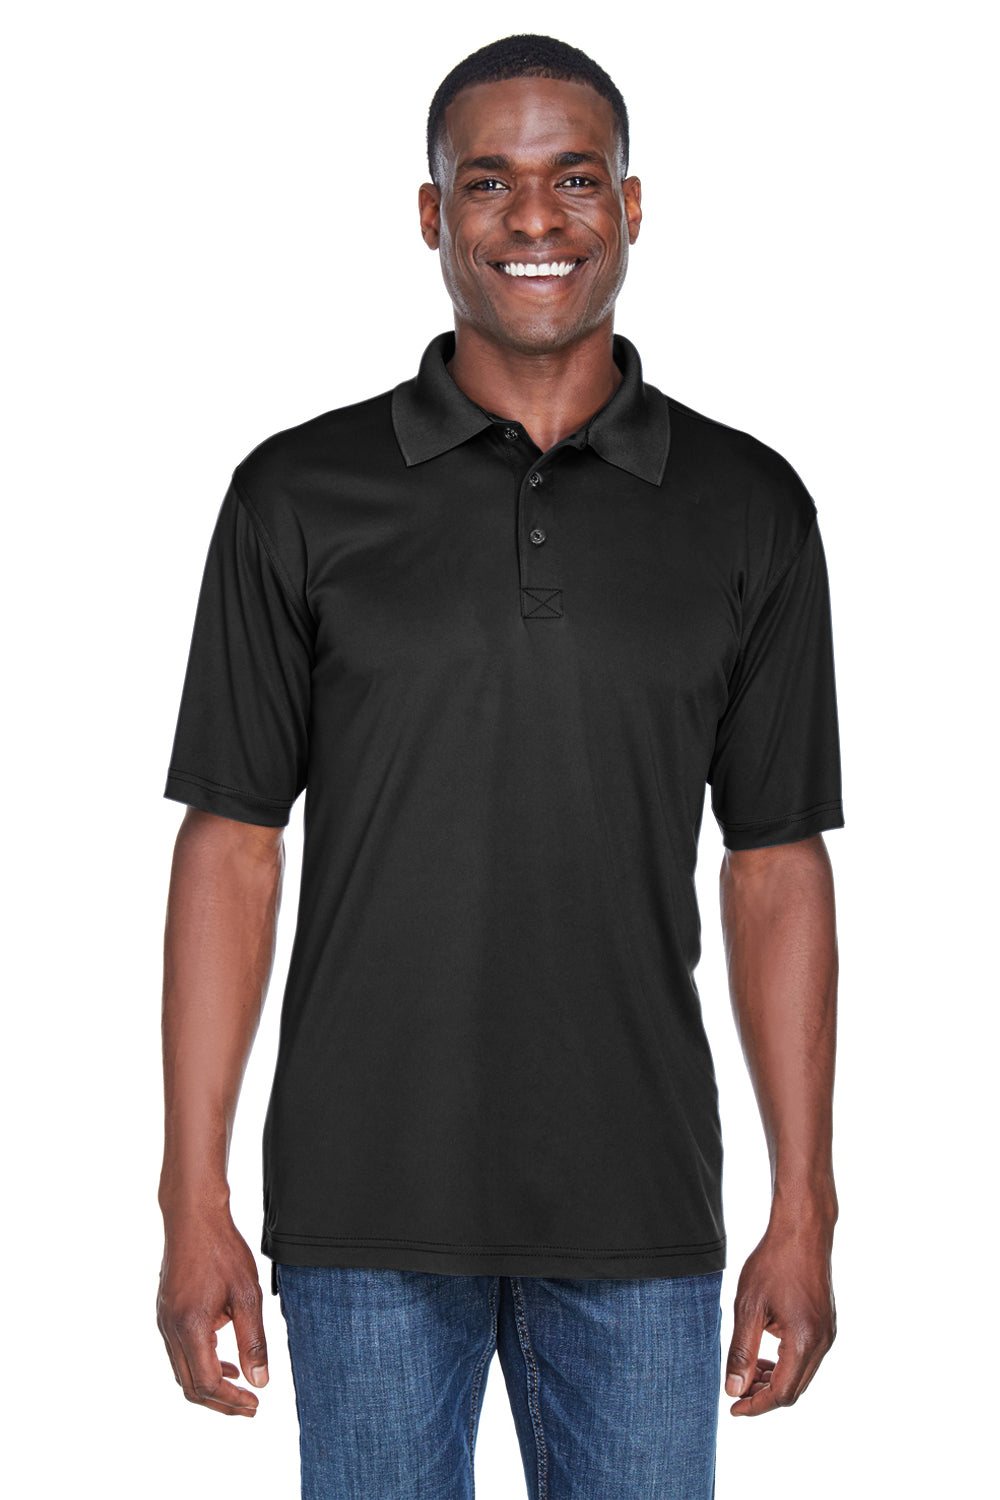 UltraClub 8425 Mens Cool & Dry Performance Moisture Wicking Short Sleeve Polo Shirt Black Front